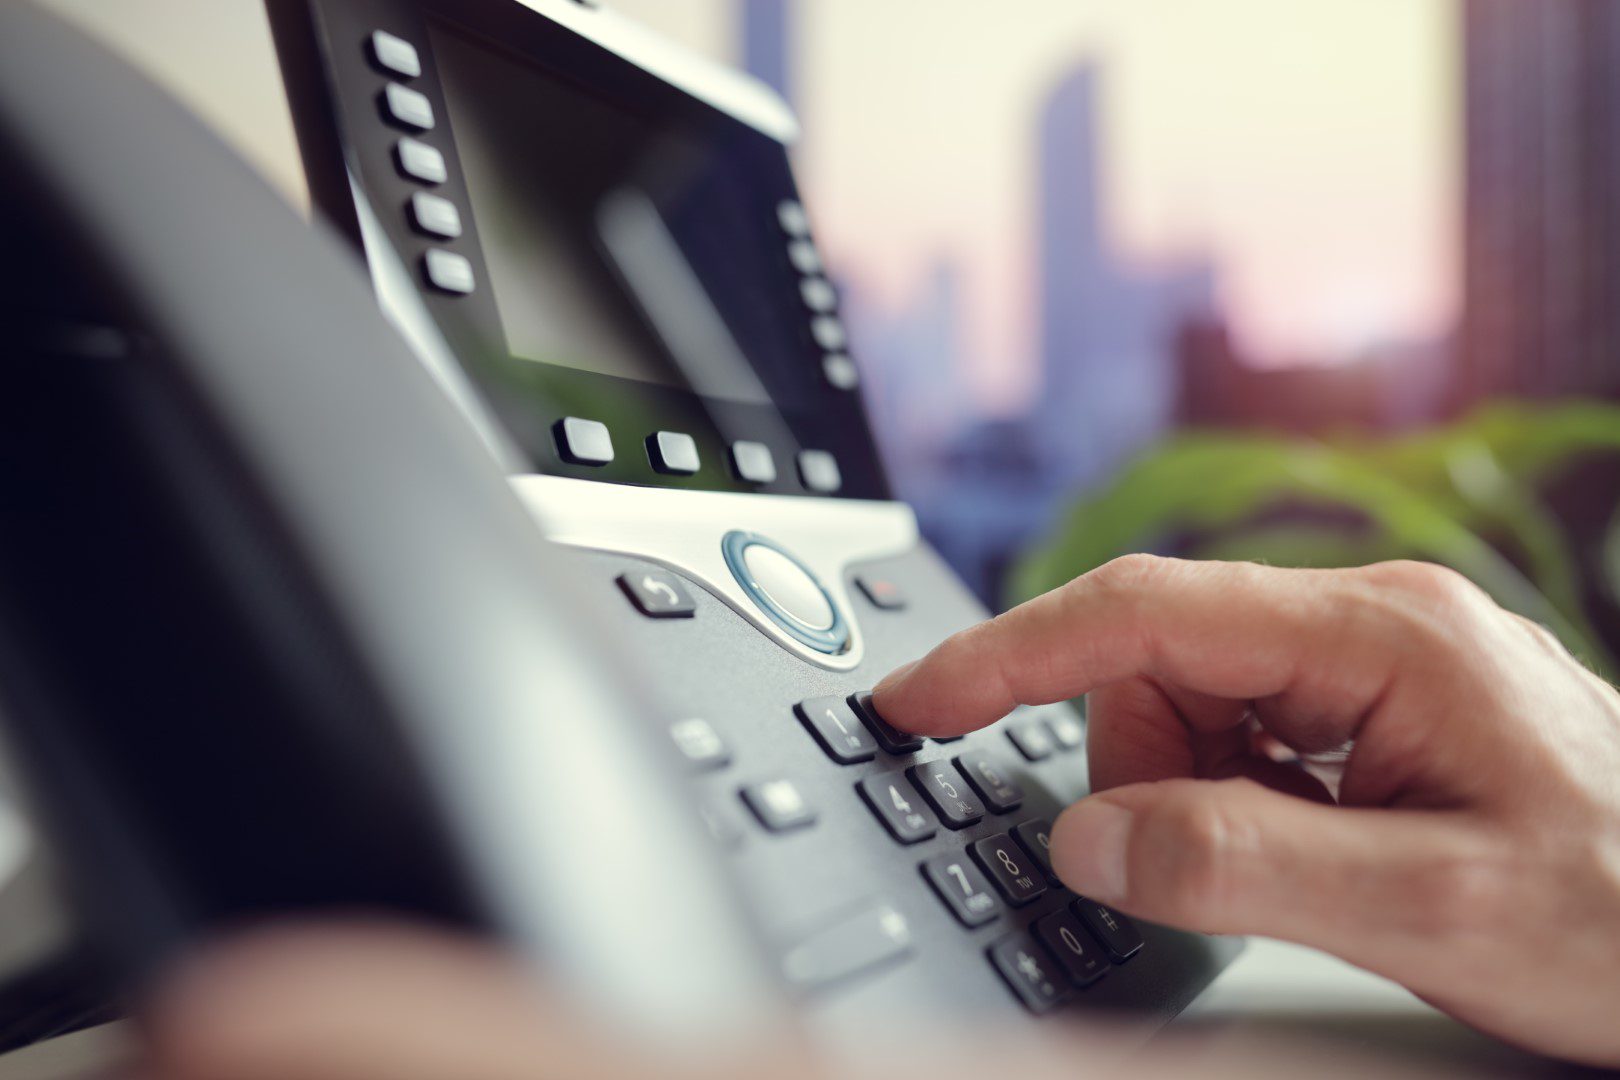 Business Phone System Disaster Recovery for IT Companies